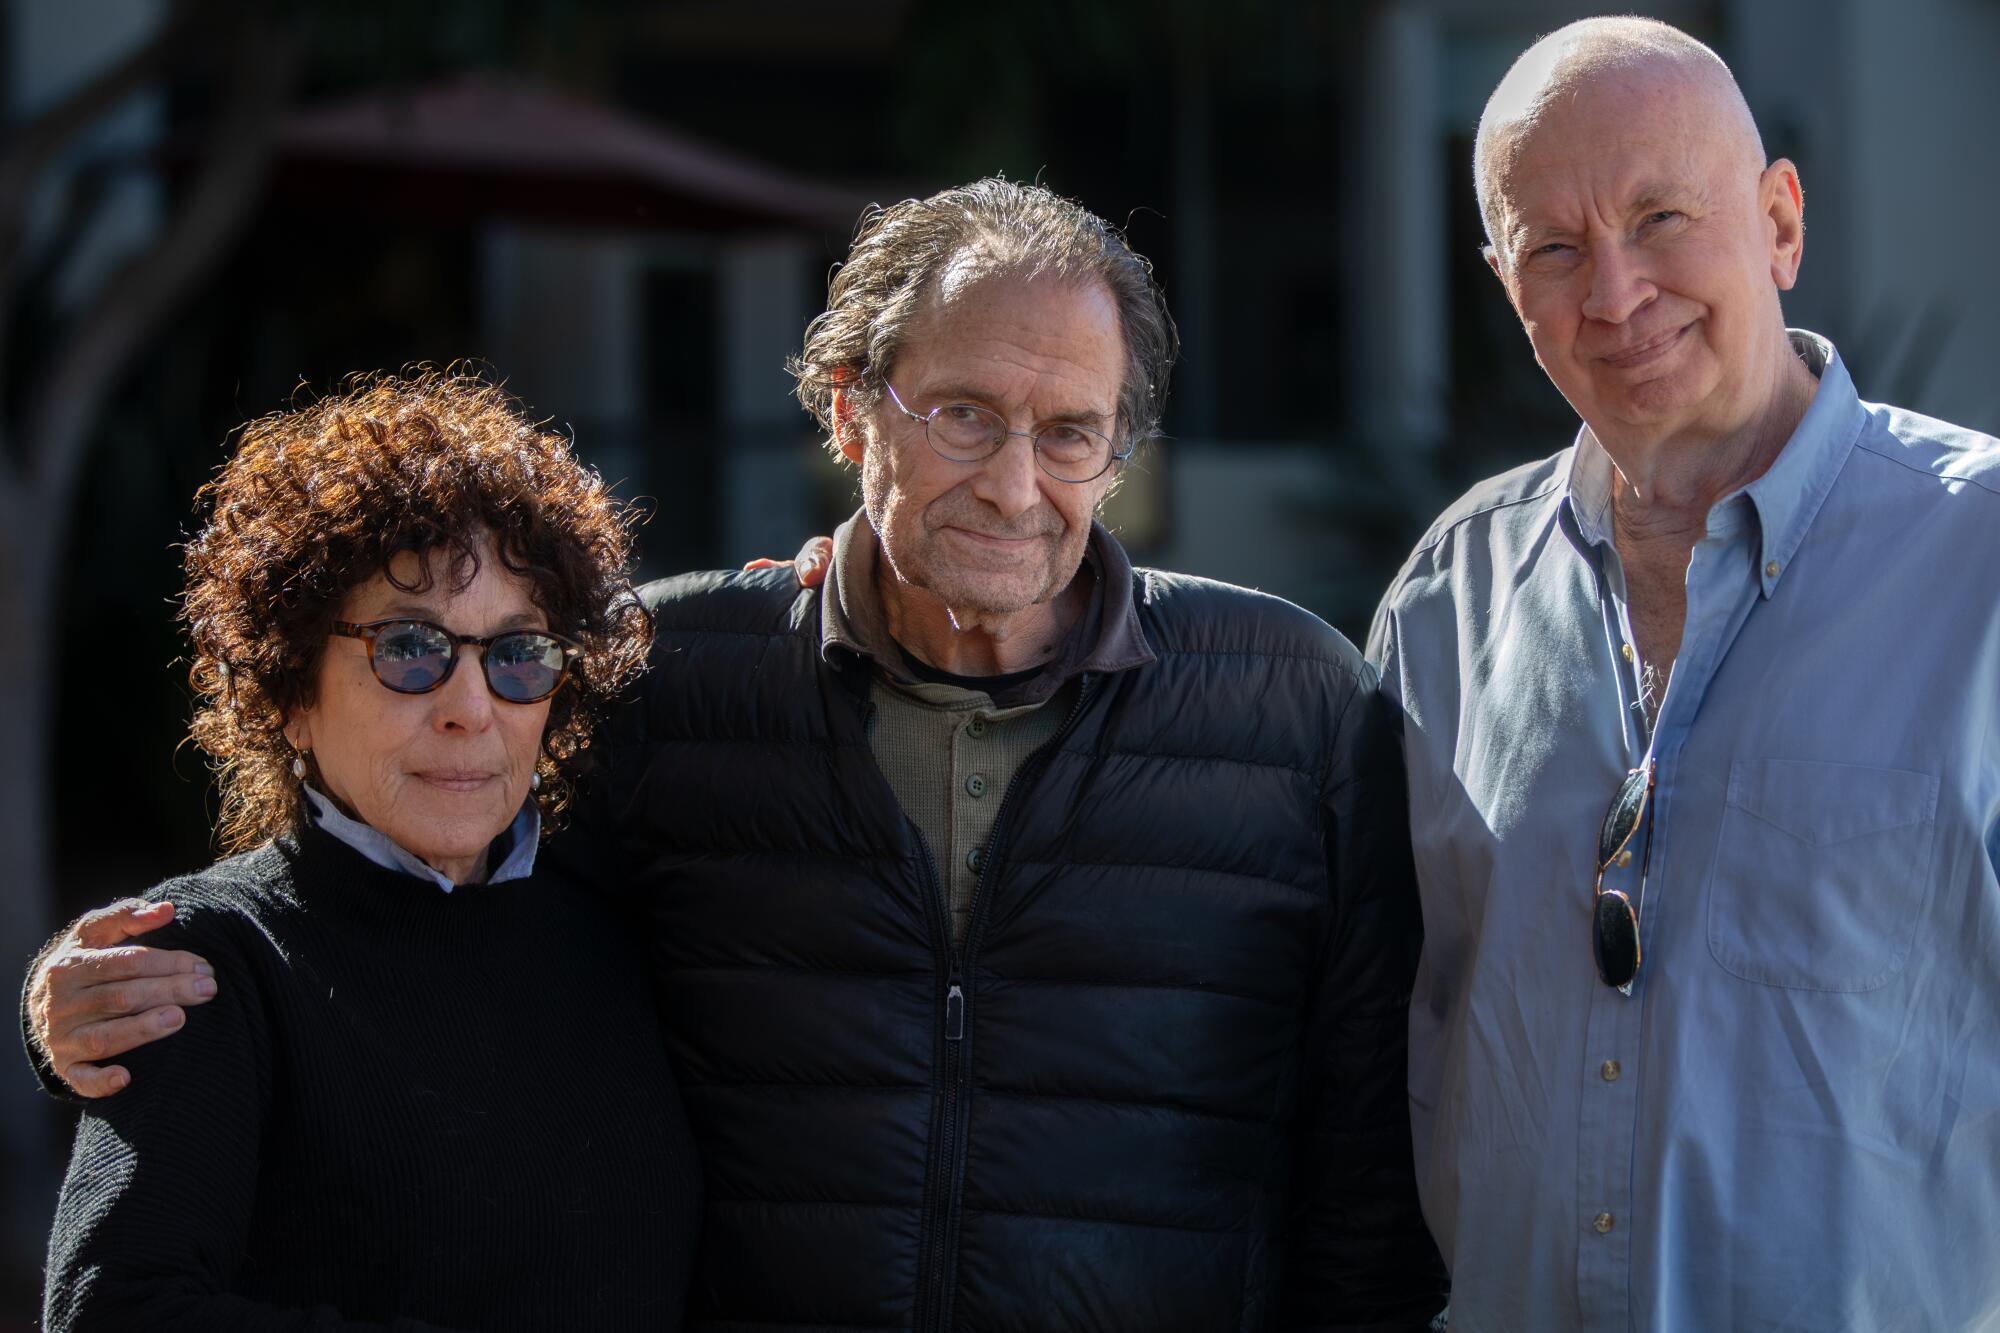 From left, Rita Milch, David Milch and John Hallenborg